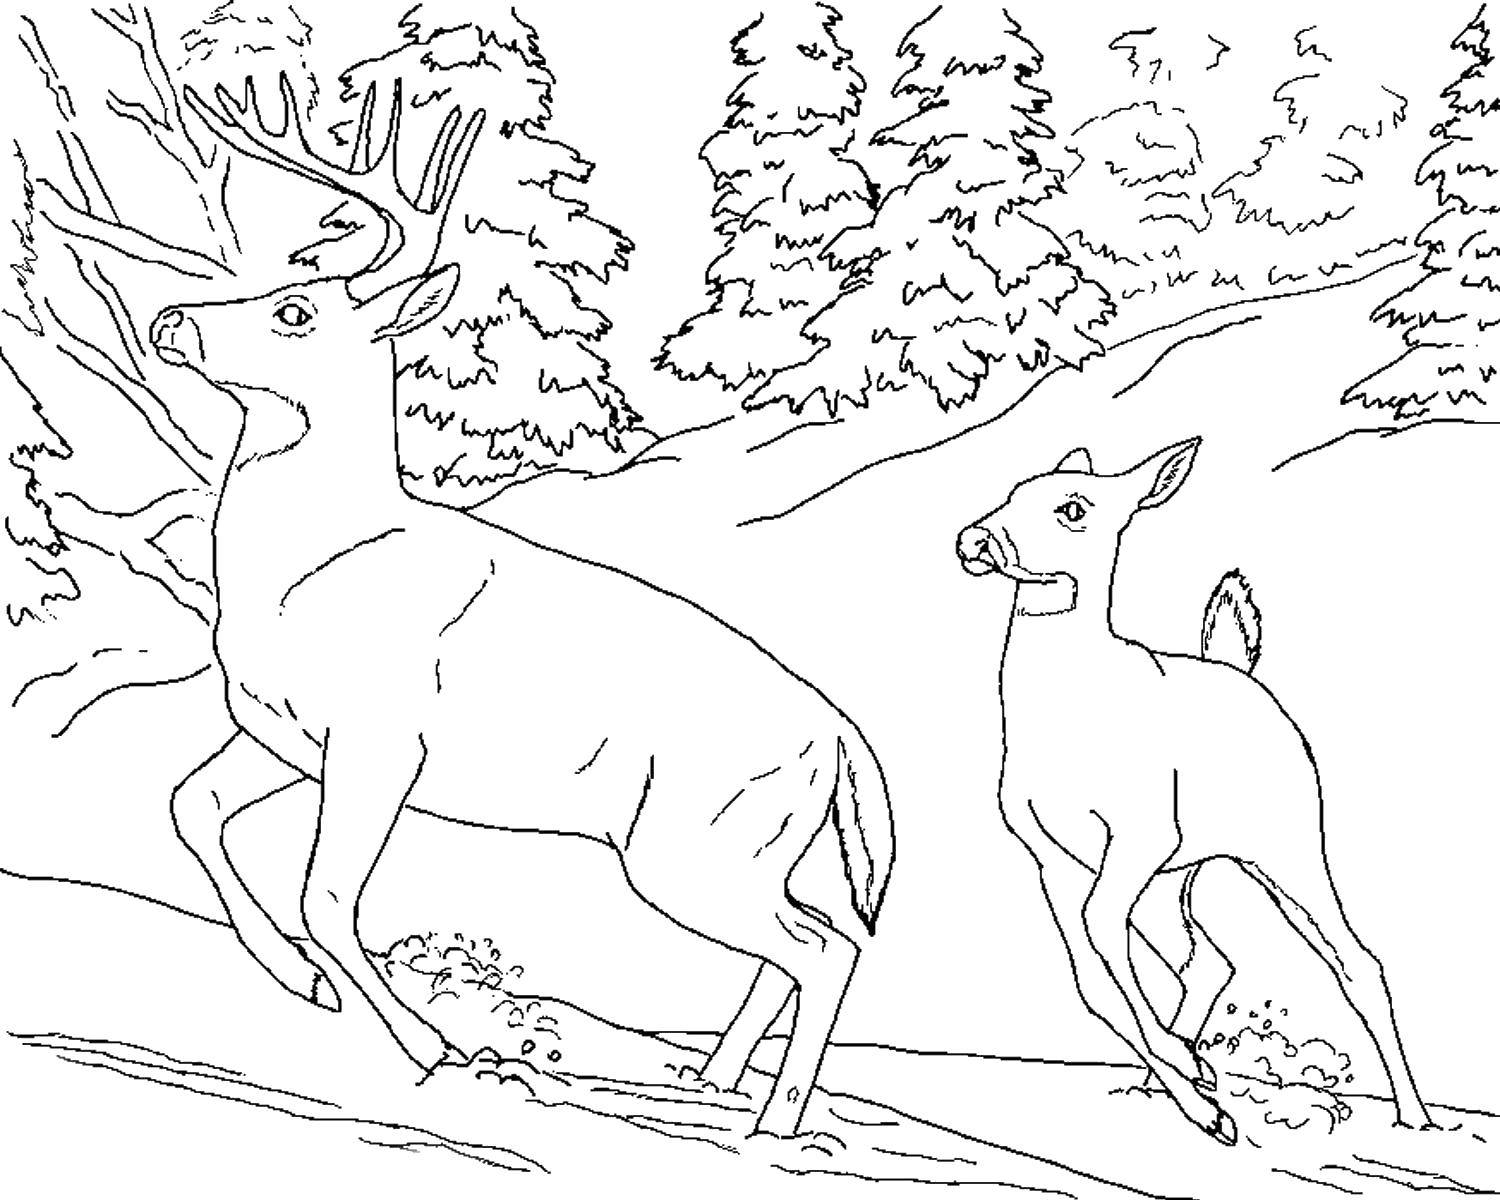 Coloring Deer run away from a predator. Category animals. Tags:  Nature, forest, animals, deer.